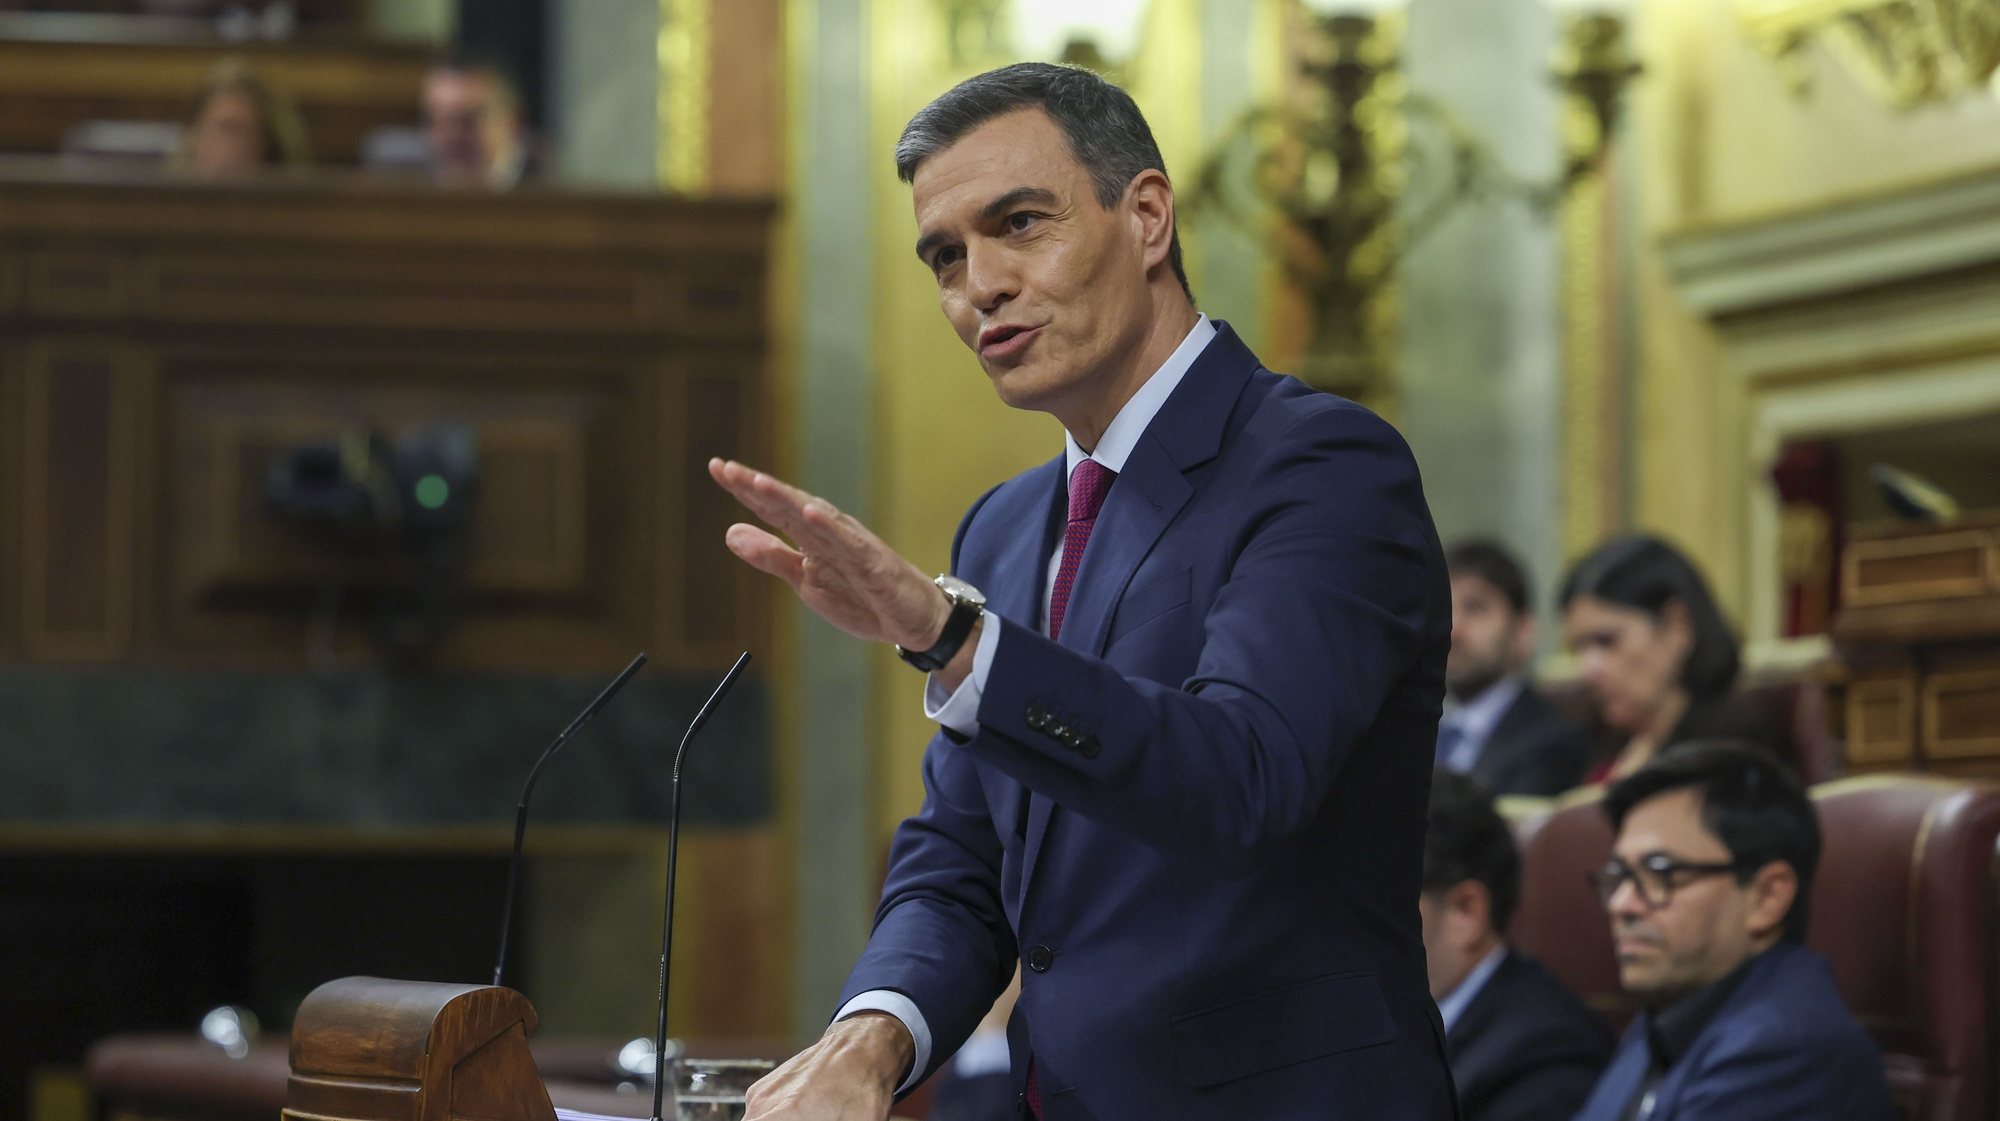 epa10976446 Spain&#039;s Acting Prime Minister Pedro Sanchez delivers a speech during the first day of his investiture debate at the Lower House of the Spanish Parliament, in Madrid, Spain, 15 November 2023. Pedro Sanchez faces his investiture debate in the parliament at a time of great political tension around the amnesty law. He is expected to be invested in a second term this week after PSOE party reached a deal with Catalan pro-independence party Junts per Catalunya (JxCat), led by former Catalan president Carles Puigdemont, by which Catalan separatists involved in the so-called independence &#039;process&#039; in 2017 would be amnestied in exchange of the key support of seven JxCat MPs, among other concessions.  EPA/Kiko Huesca